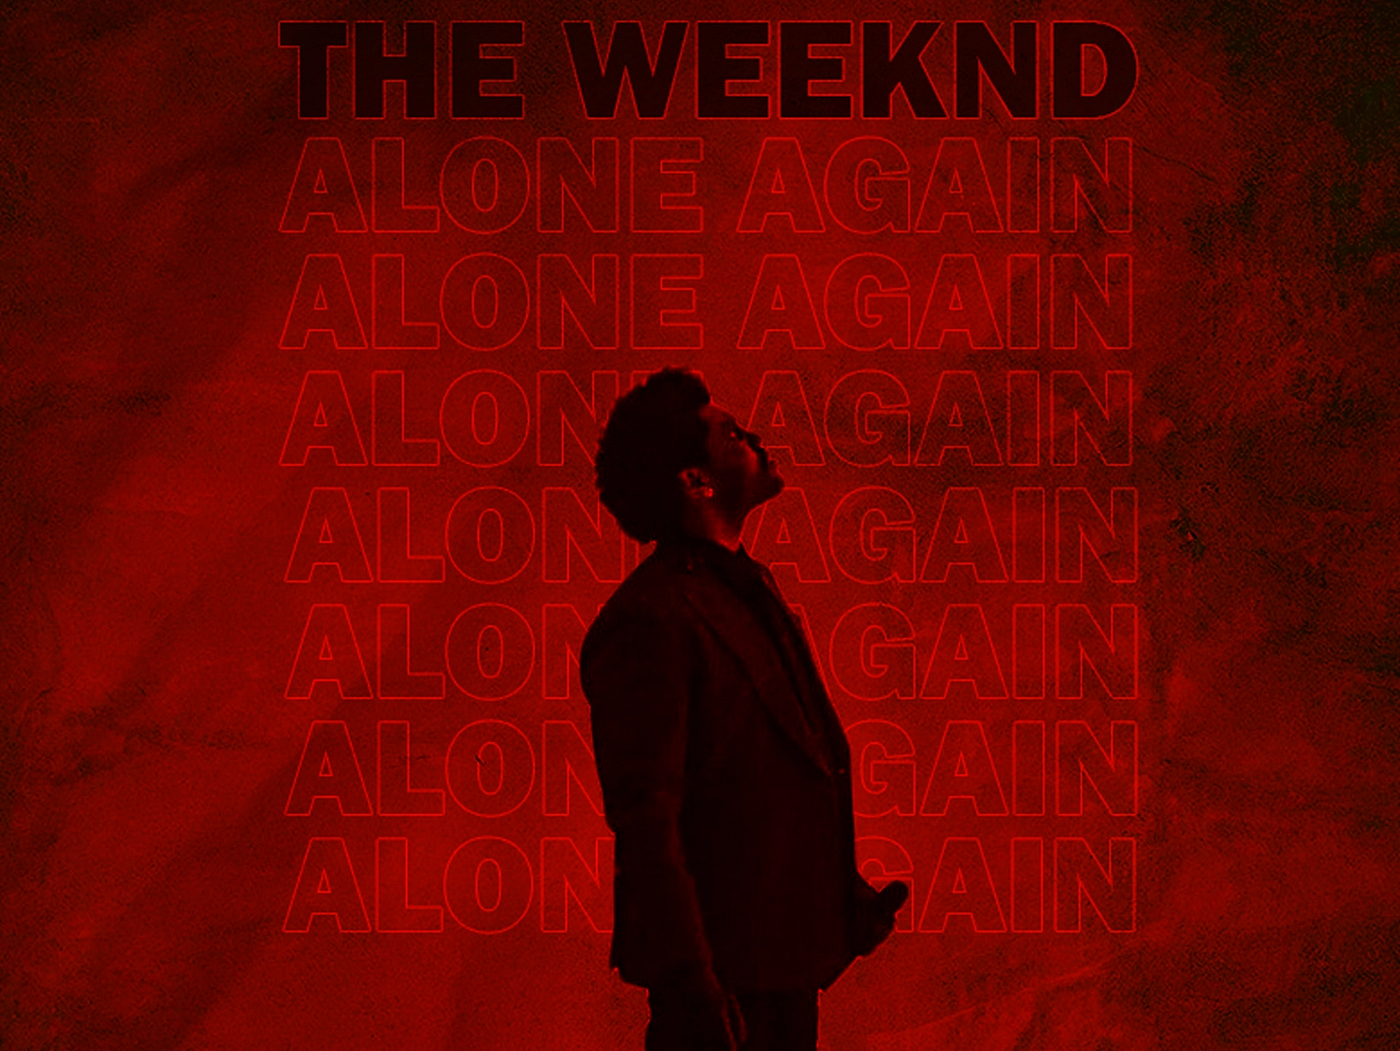 Alone Again by The Weeknd - Song Meanings and Facts